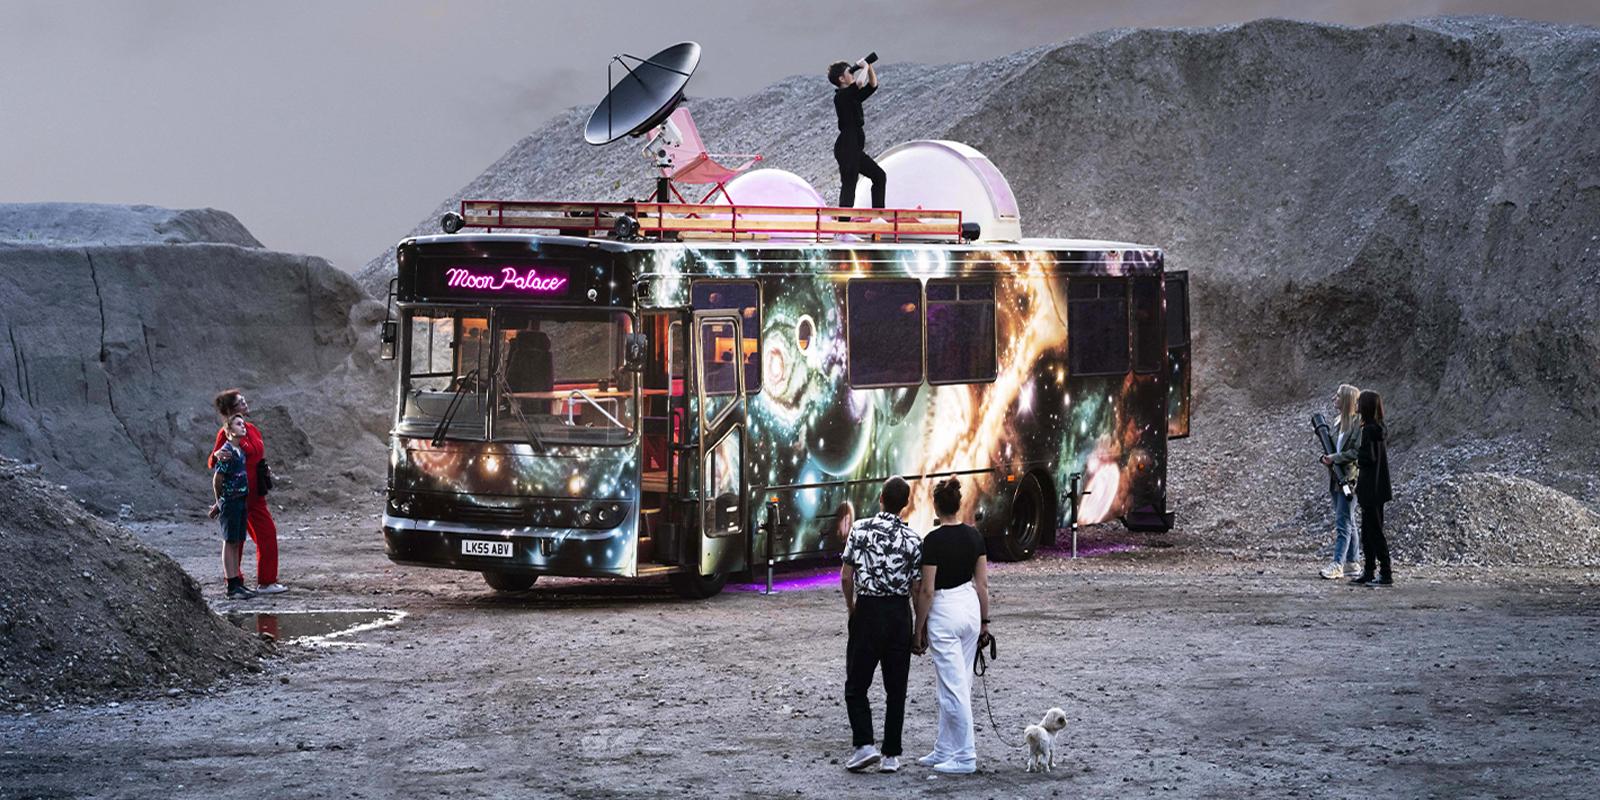 Mobile observatory Moon Palace rolls onto campus to reunite with student creatives